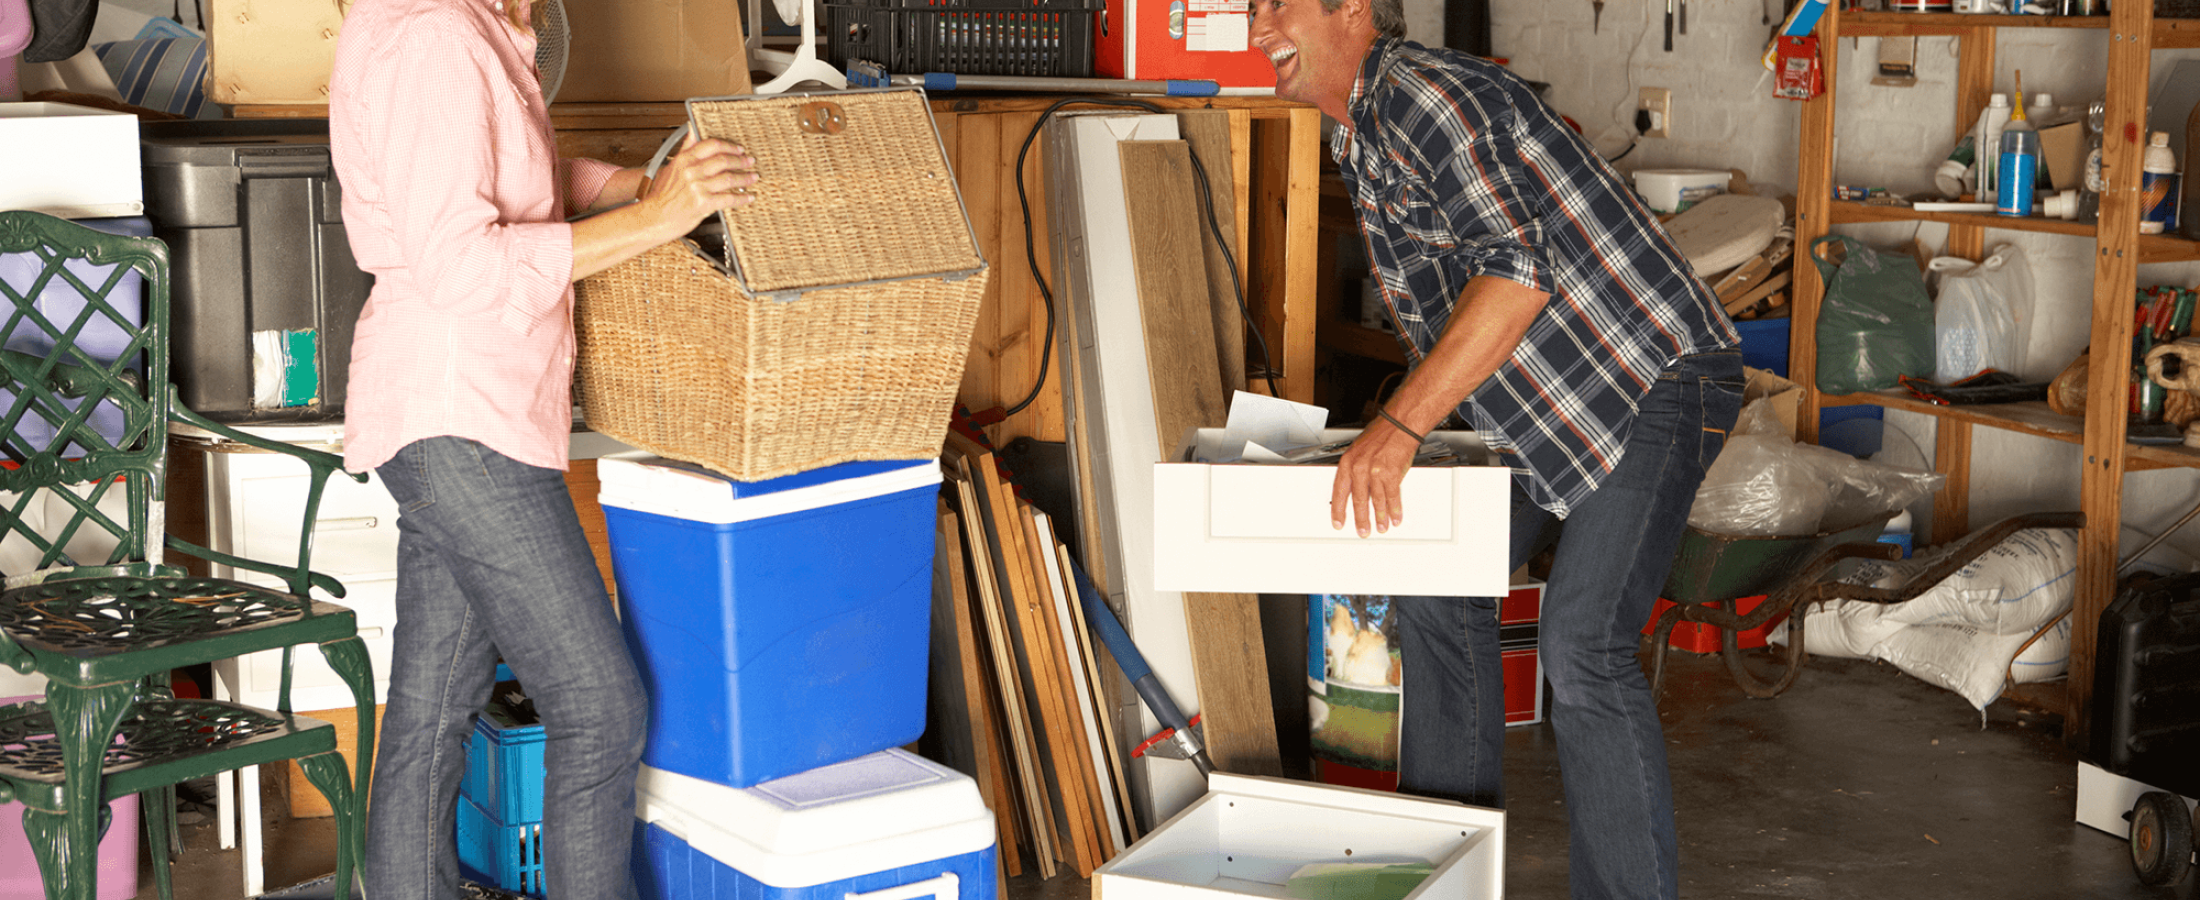 Storage solutions for your garage or shed